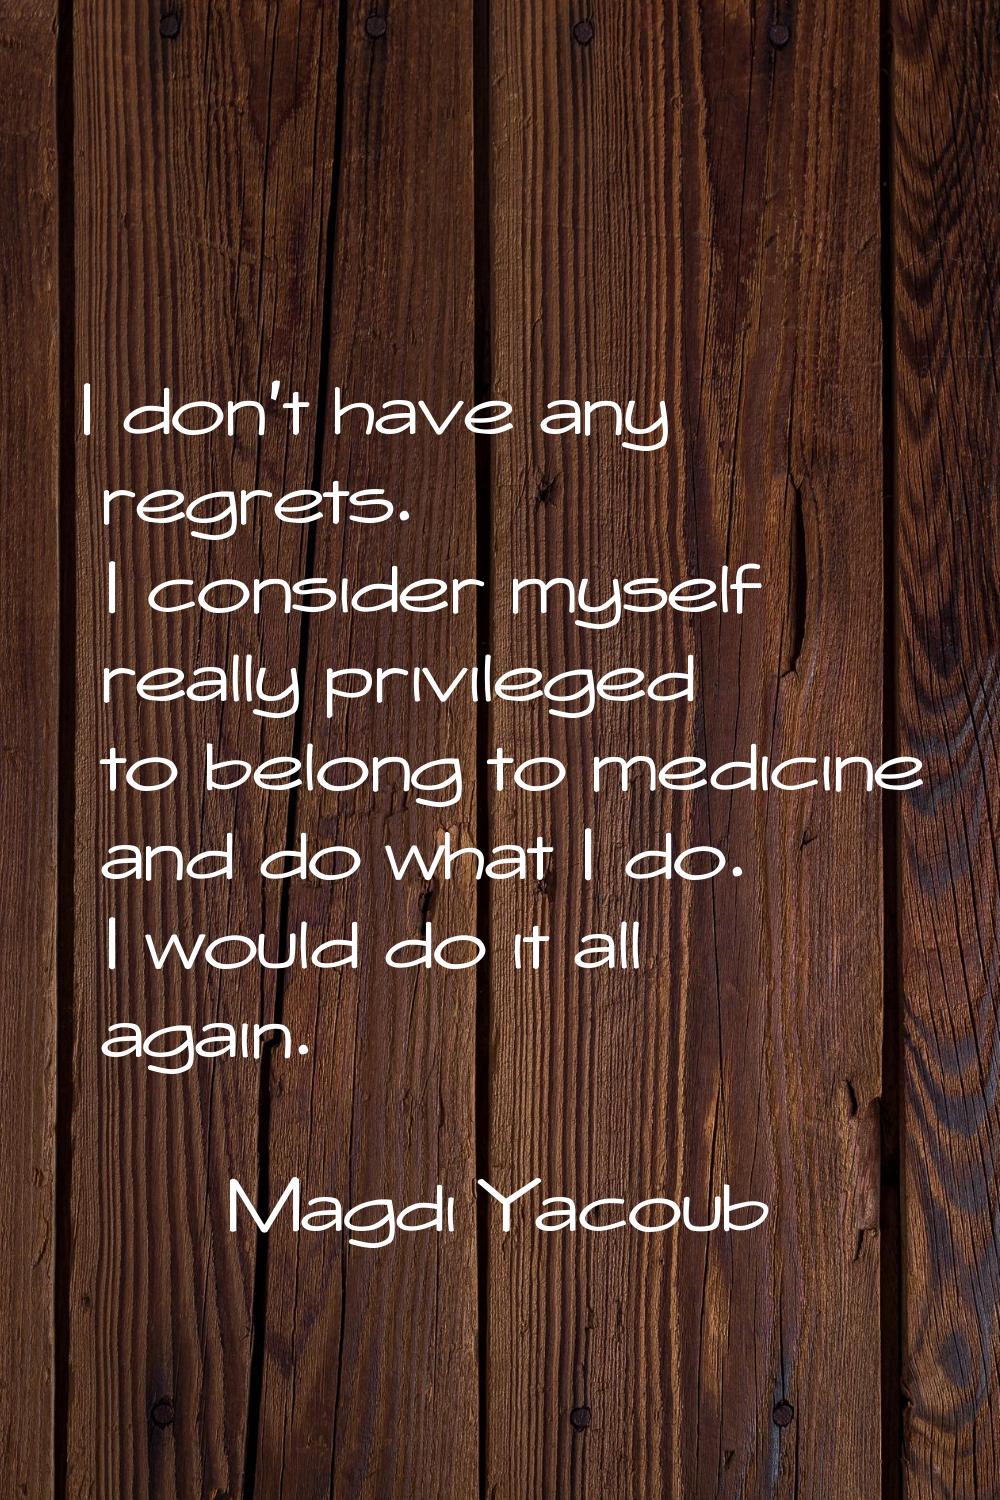 I don't have any regrets. I consider myself really privileged to belong to medicine and do what I d